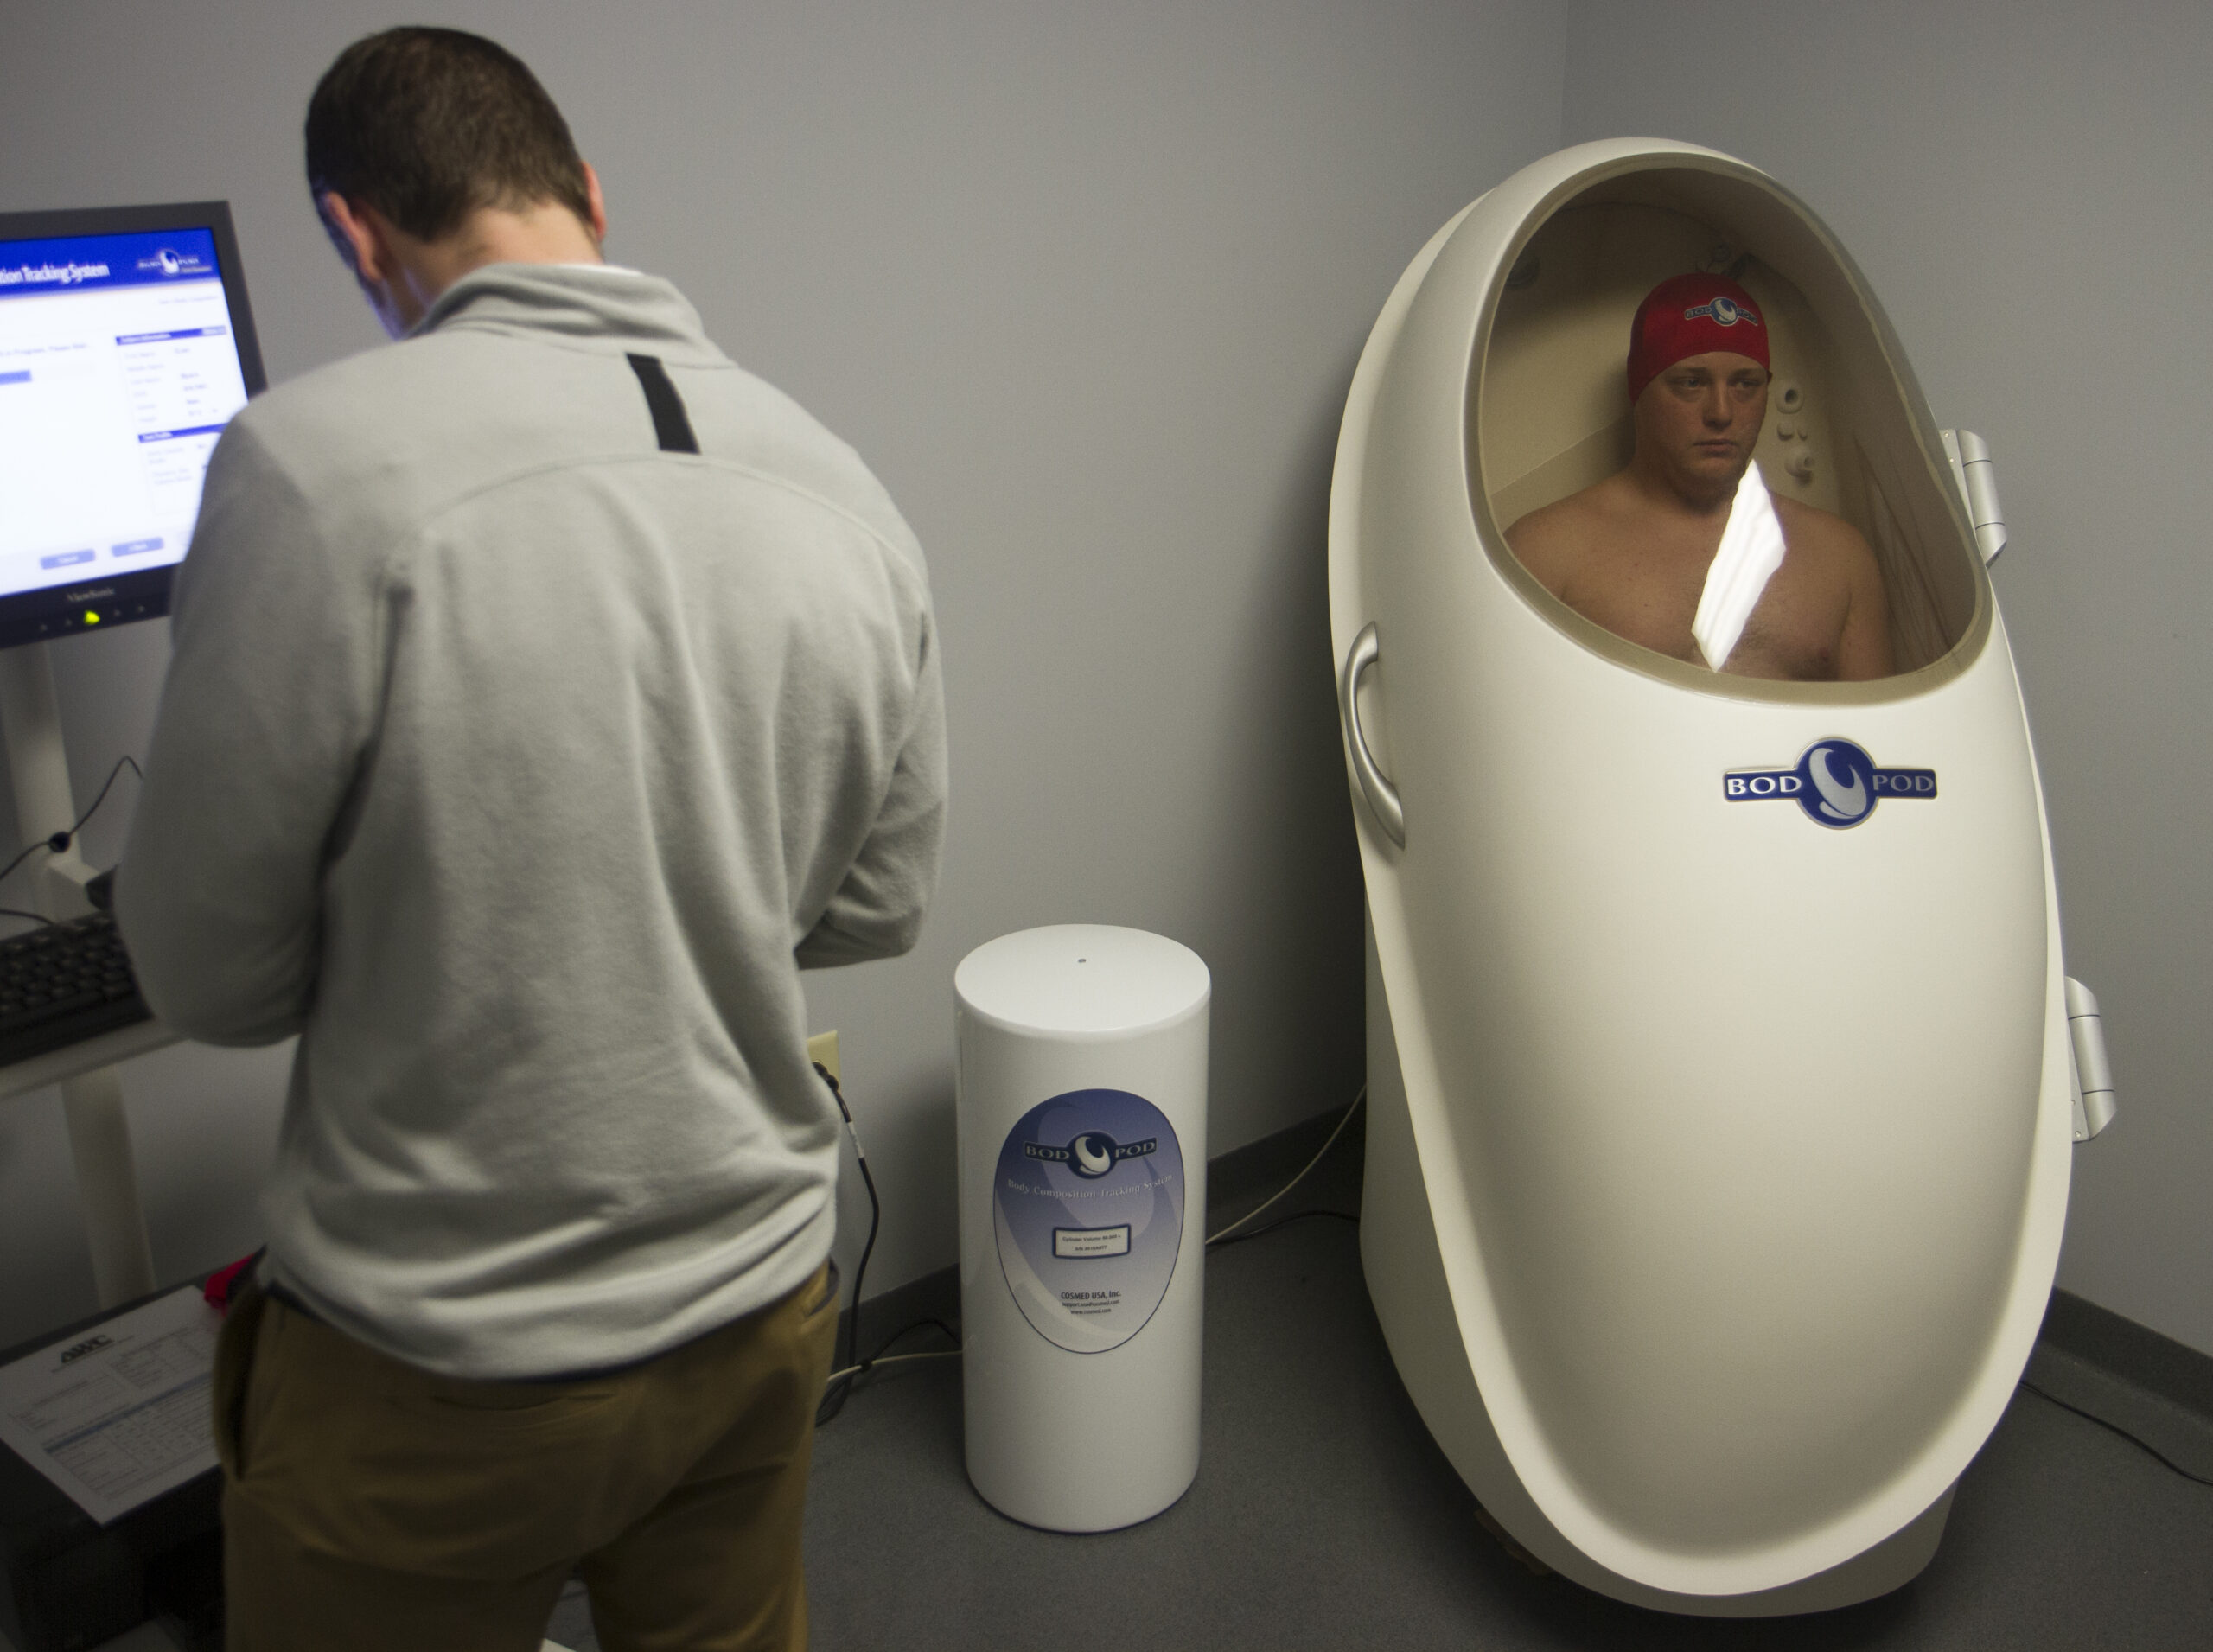 Sgt. Evan Myers with the 120th Public Affairs Detachment sits inside the BodPod® body composition measurement system as Logan Blackwell, a health educator at the Army Wellness Center, conducts a health assessment at Camp Atterbury May 8. The Bod Pod is a tool used to accurately exam an individuals height, weight and body fat percentage. (U.S. Army National Guard photo by Spc. Hannah Clifton)